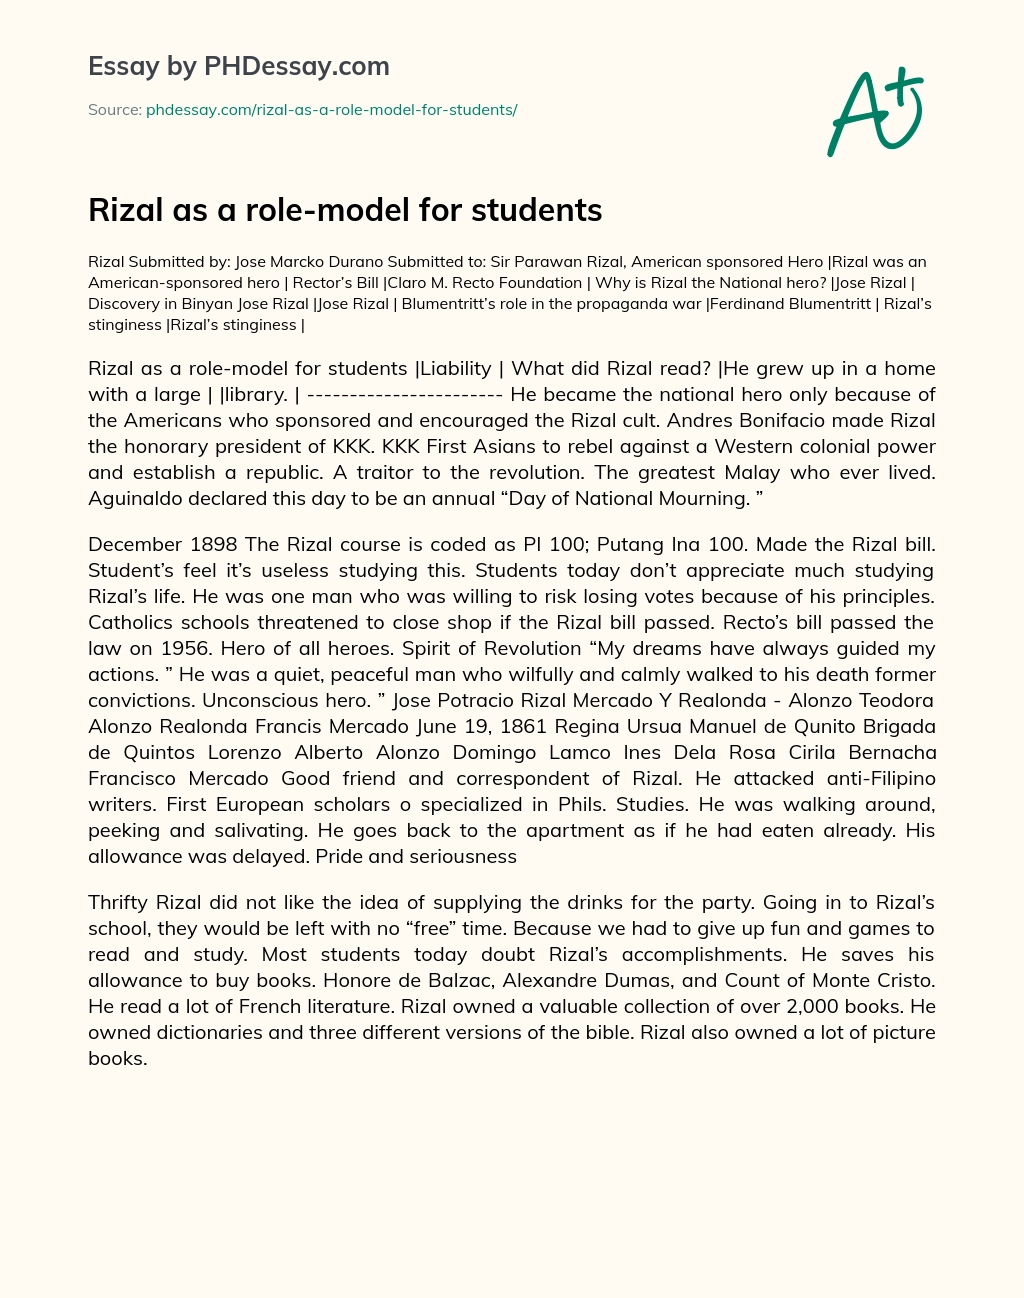 Rizal as a role-model for students essay